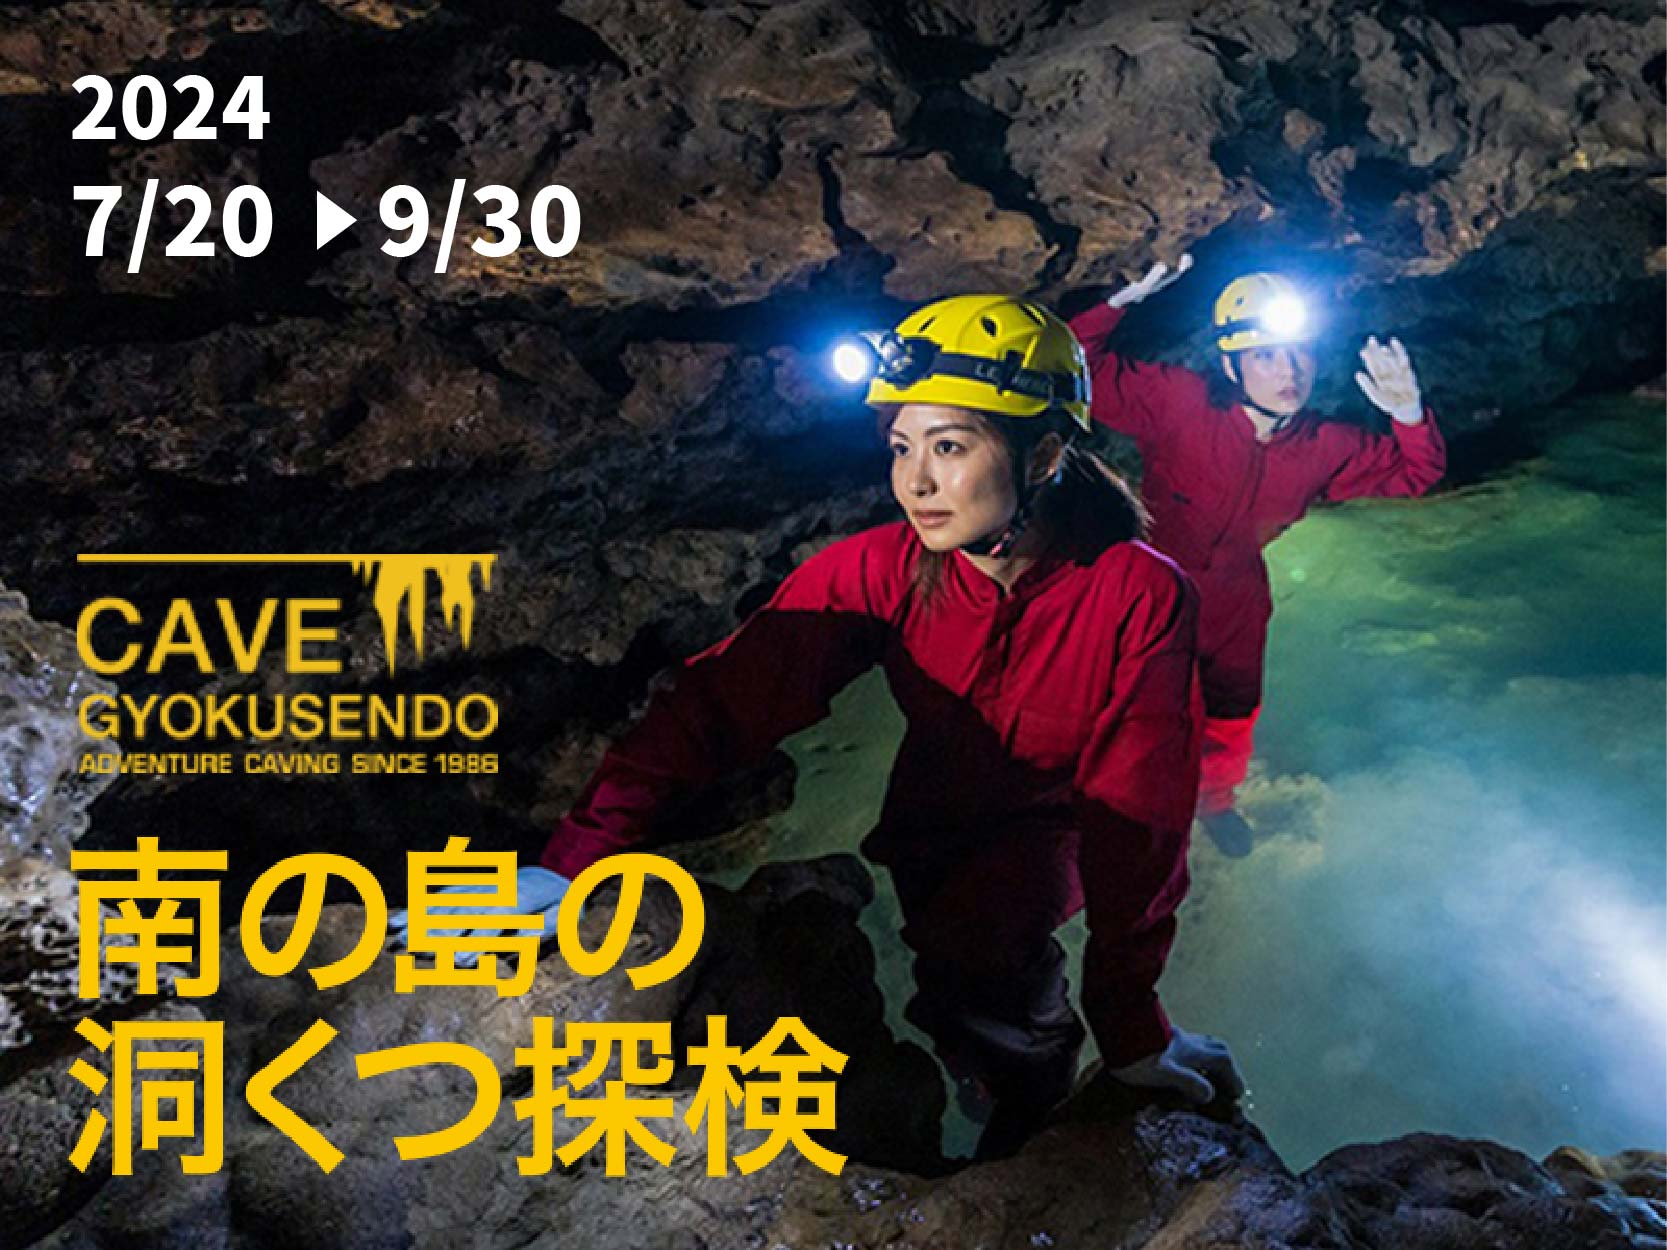 Explore the Cave in the Southern Island